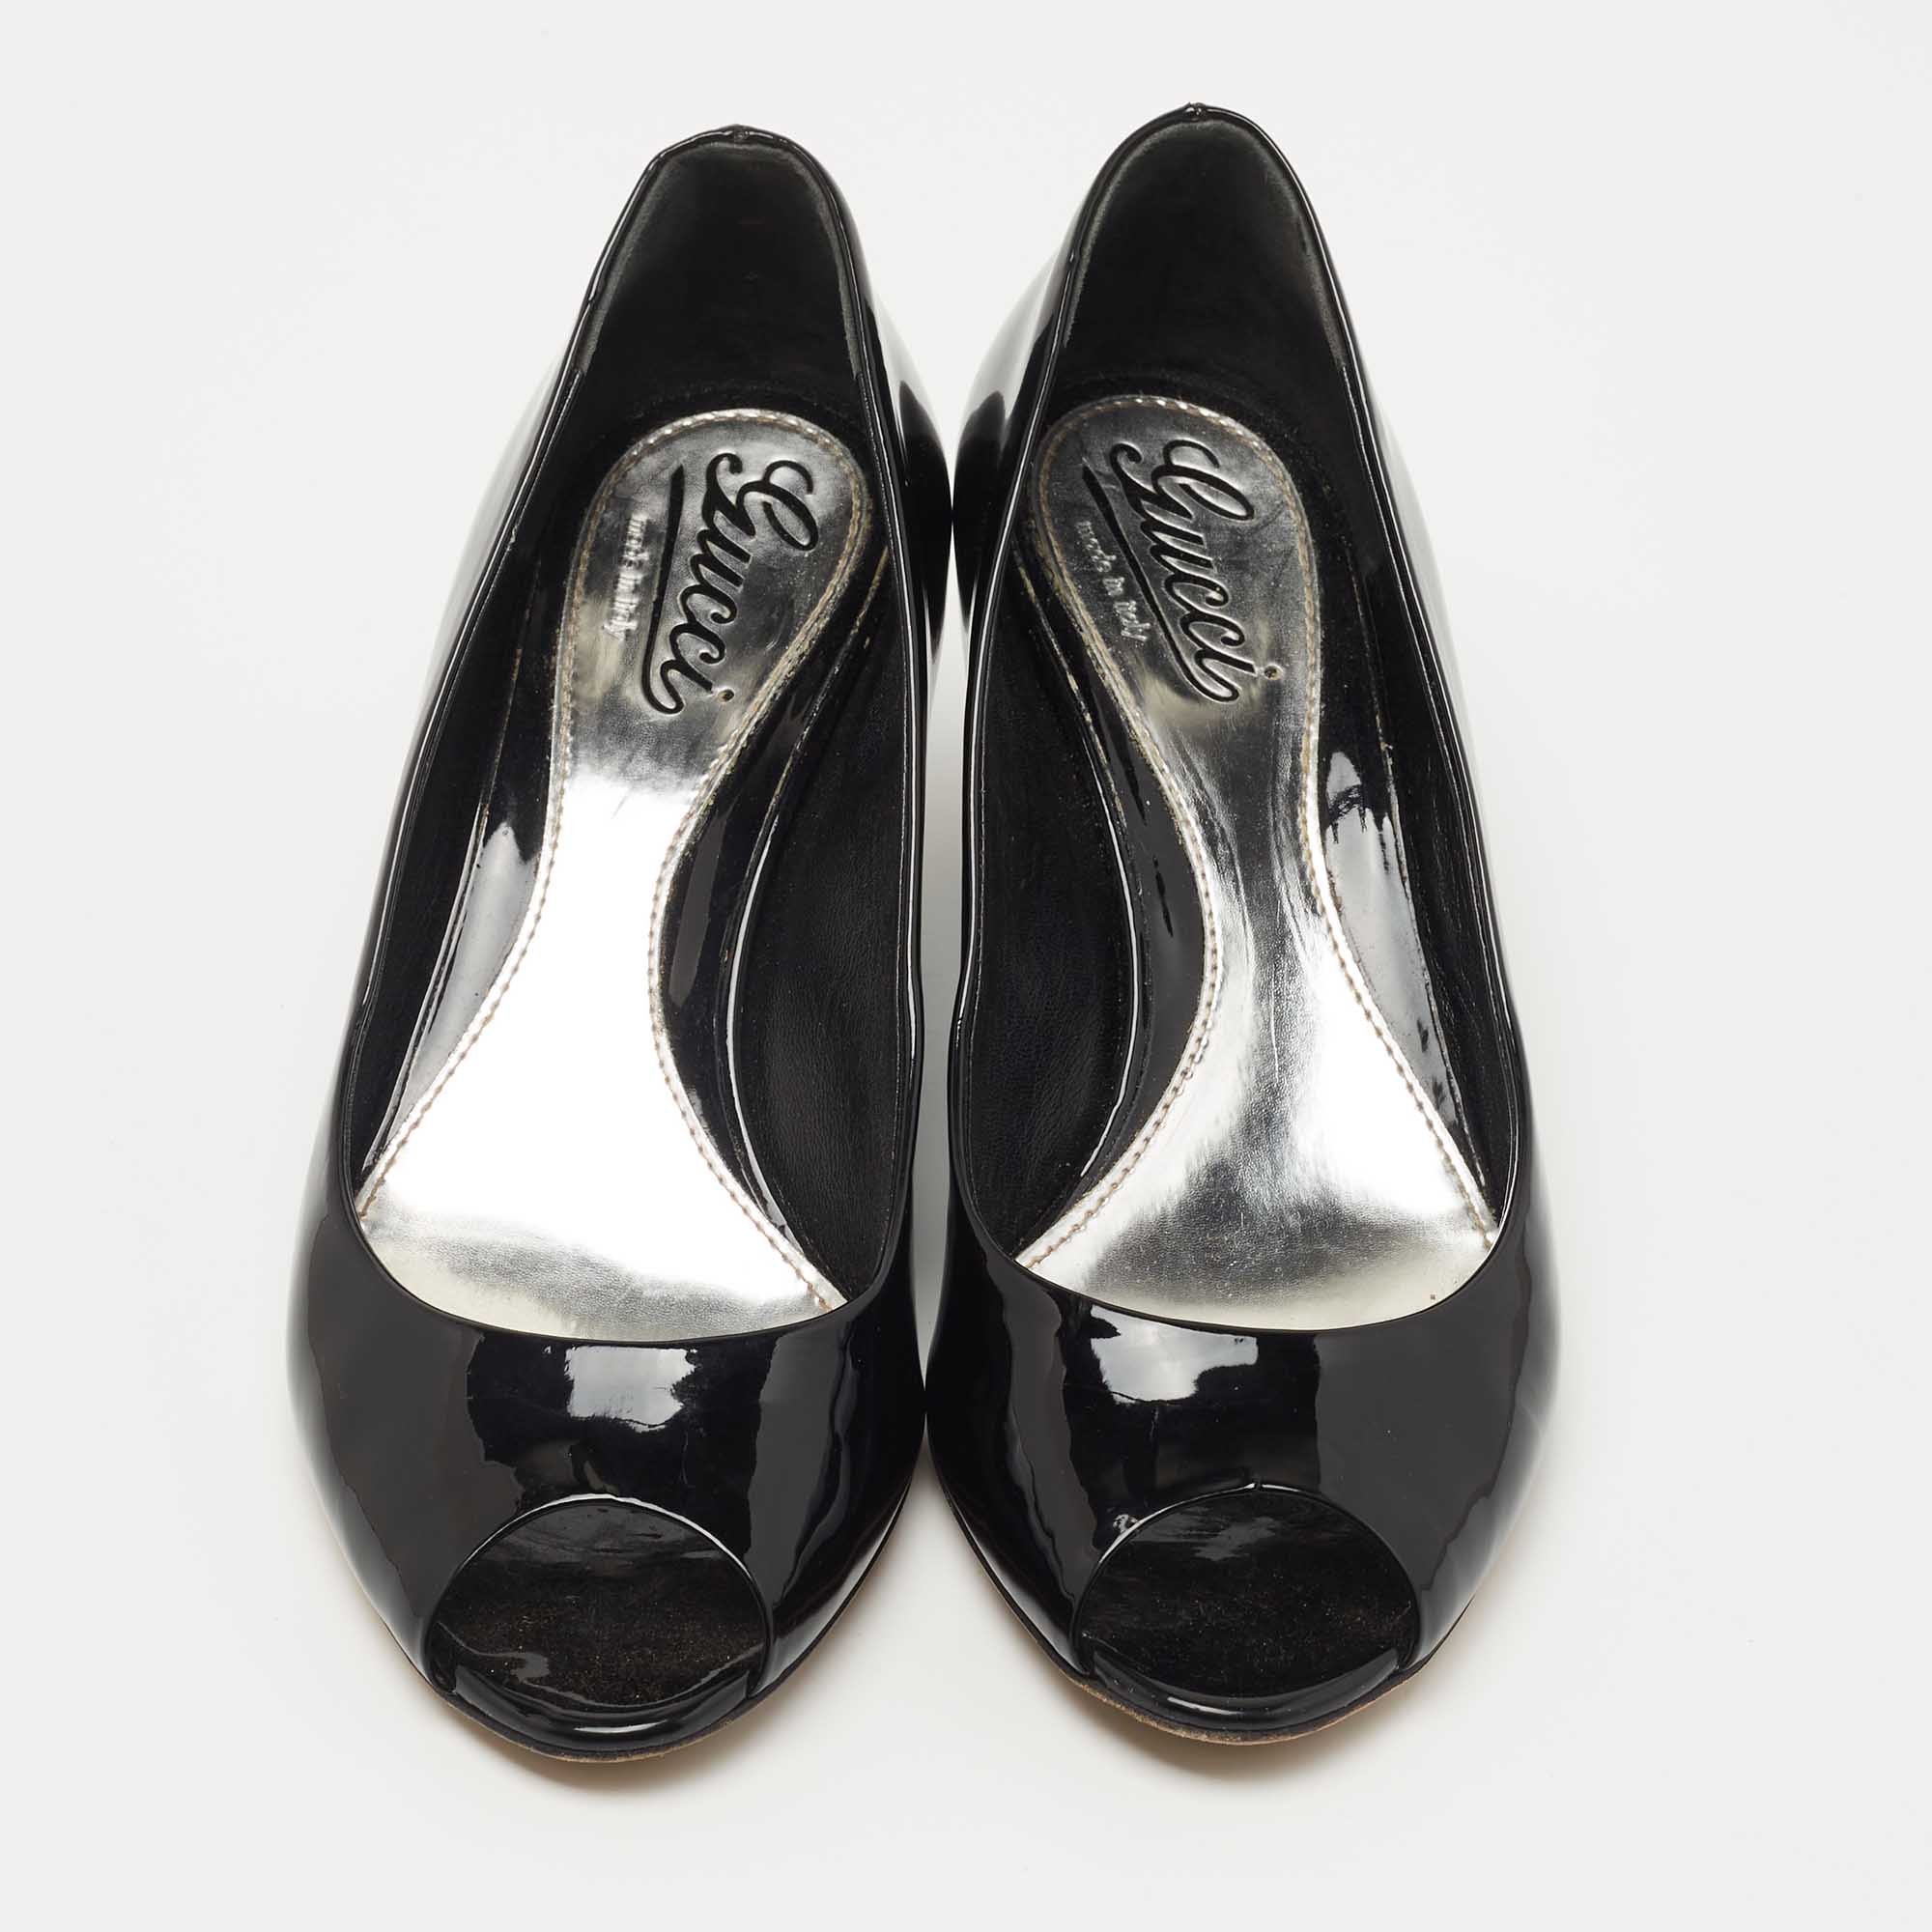 Gucci Black Patent Leather Peep Toe Wedge Pumps Size 36